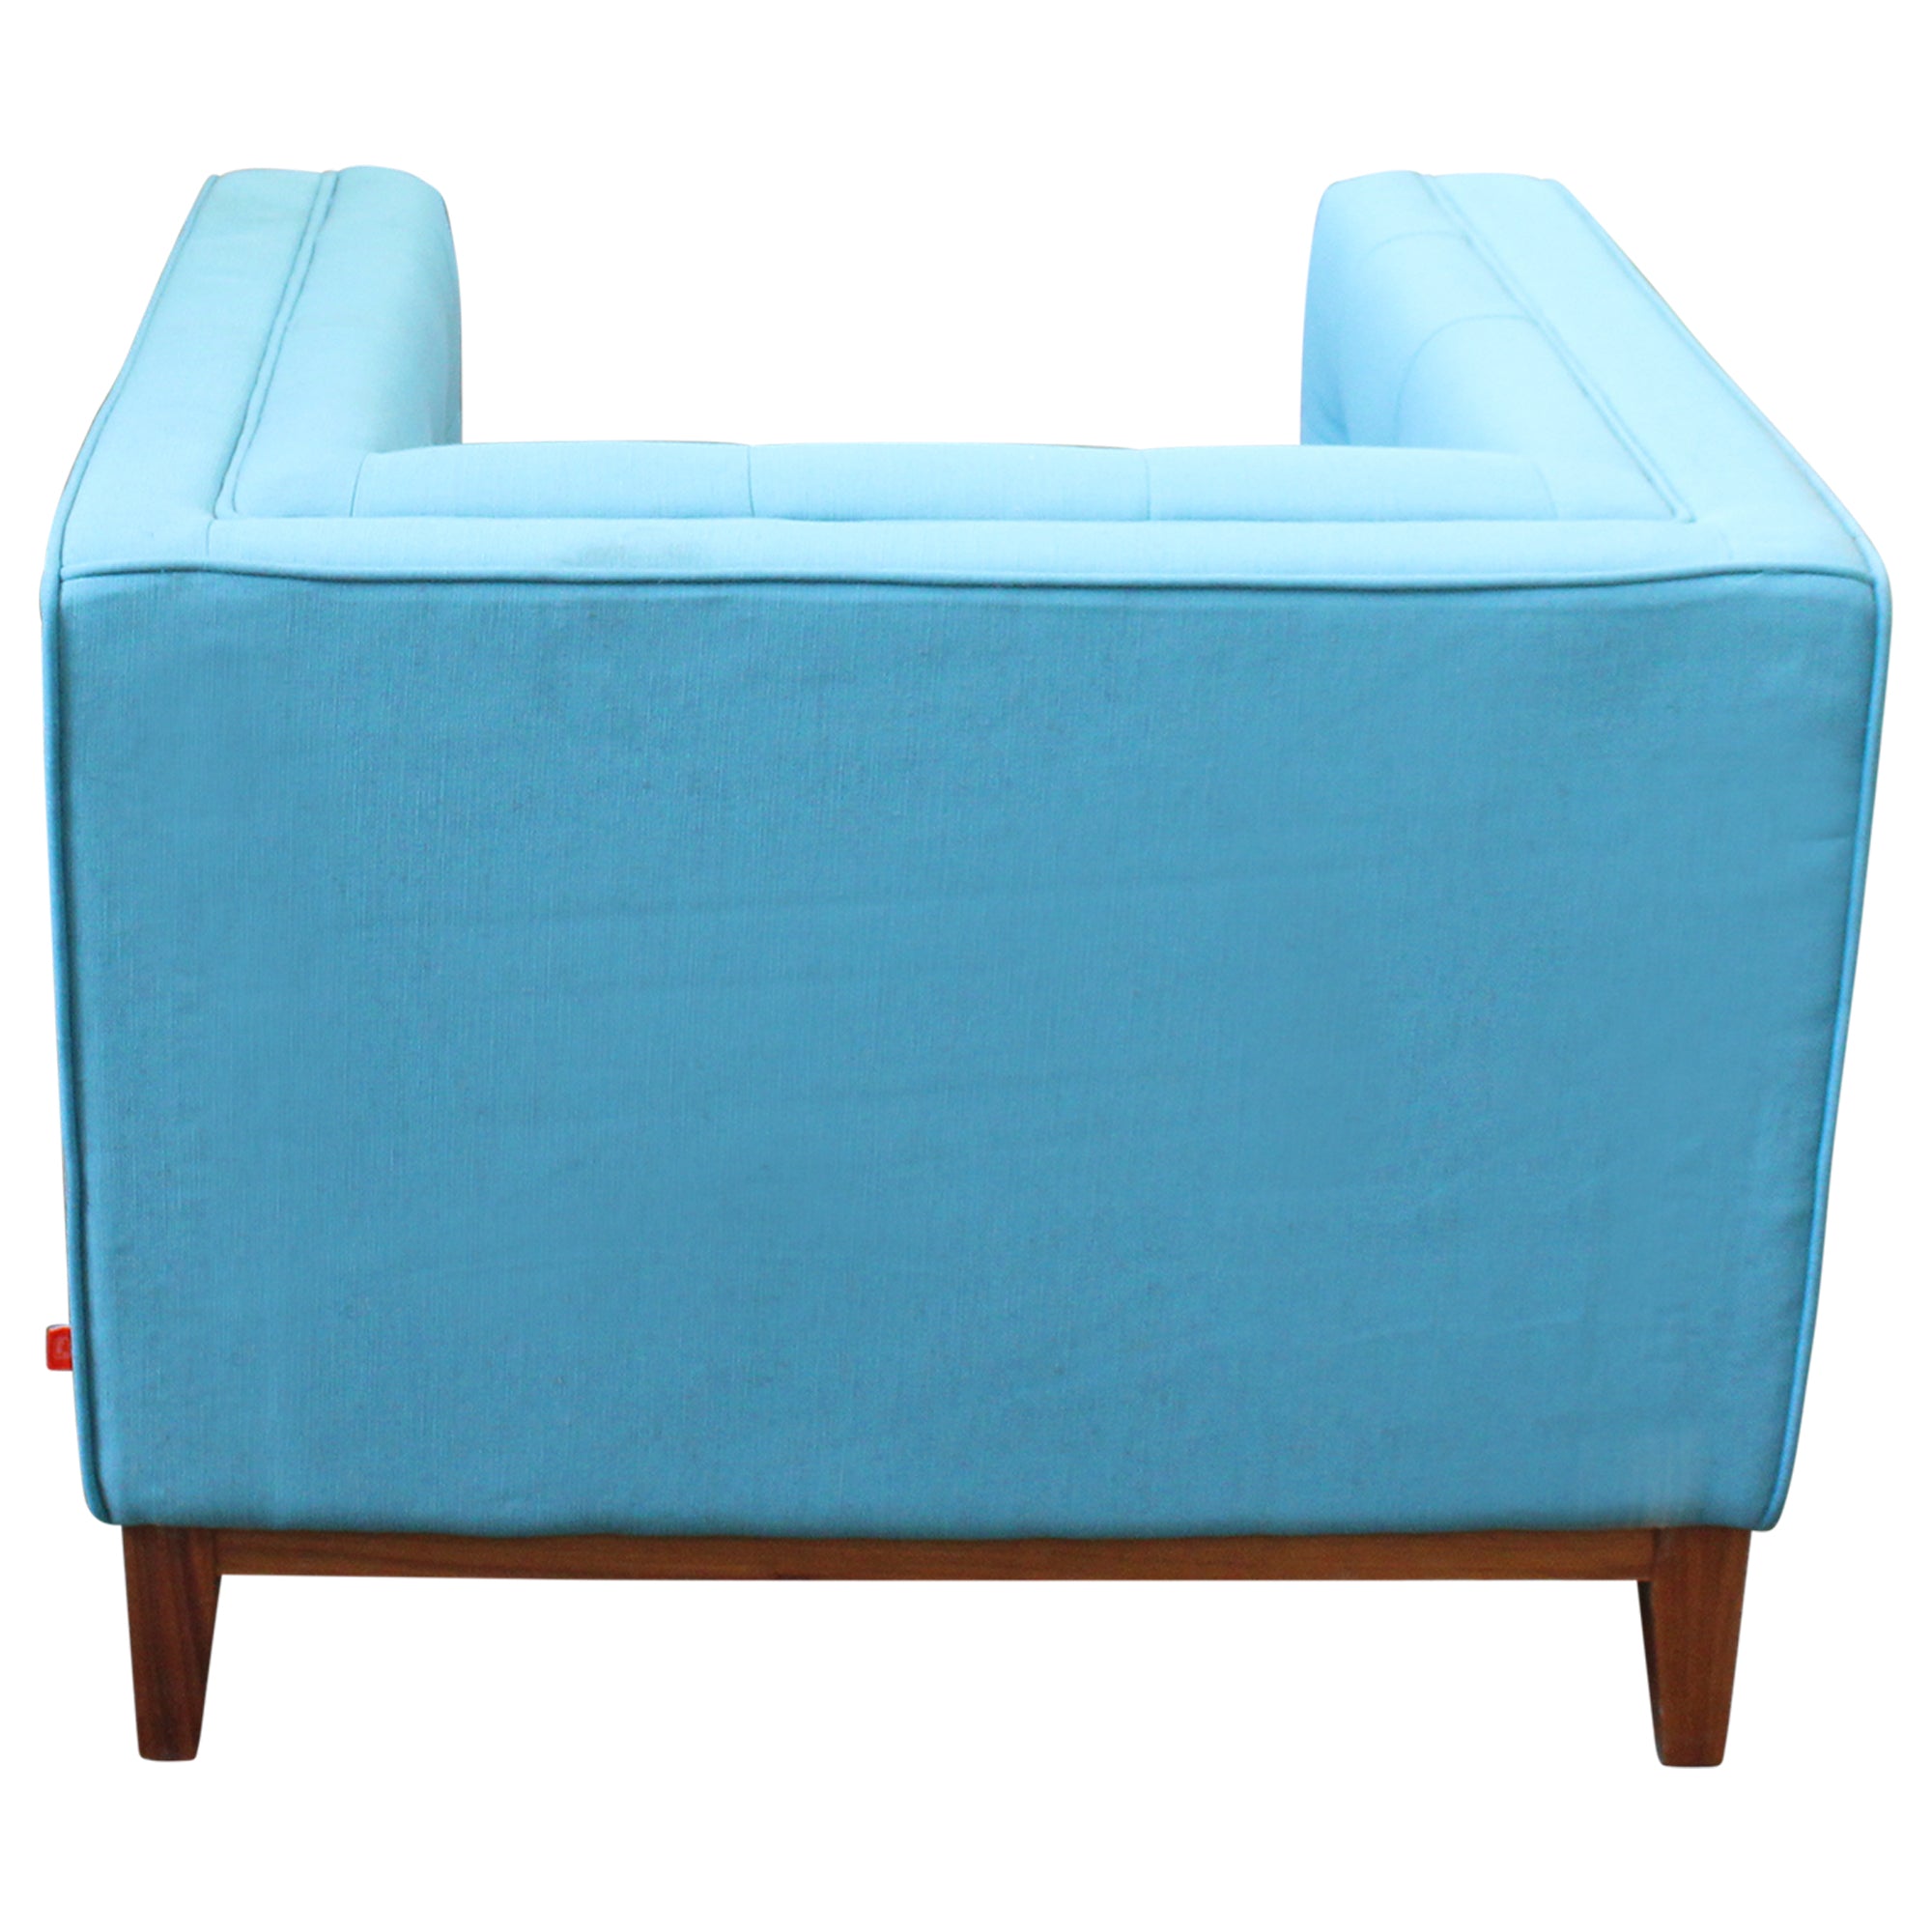 Atwood Chair by Gus Modern - Blue - Preowned